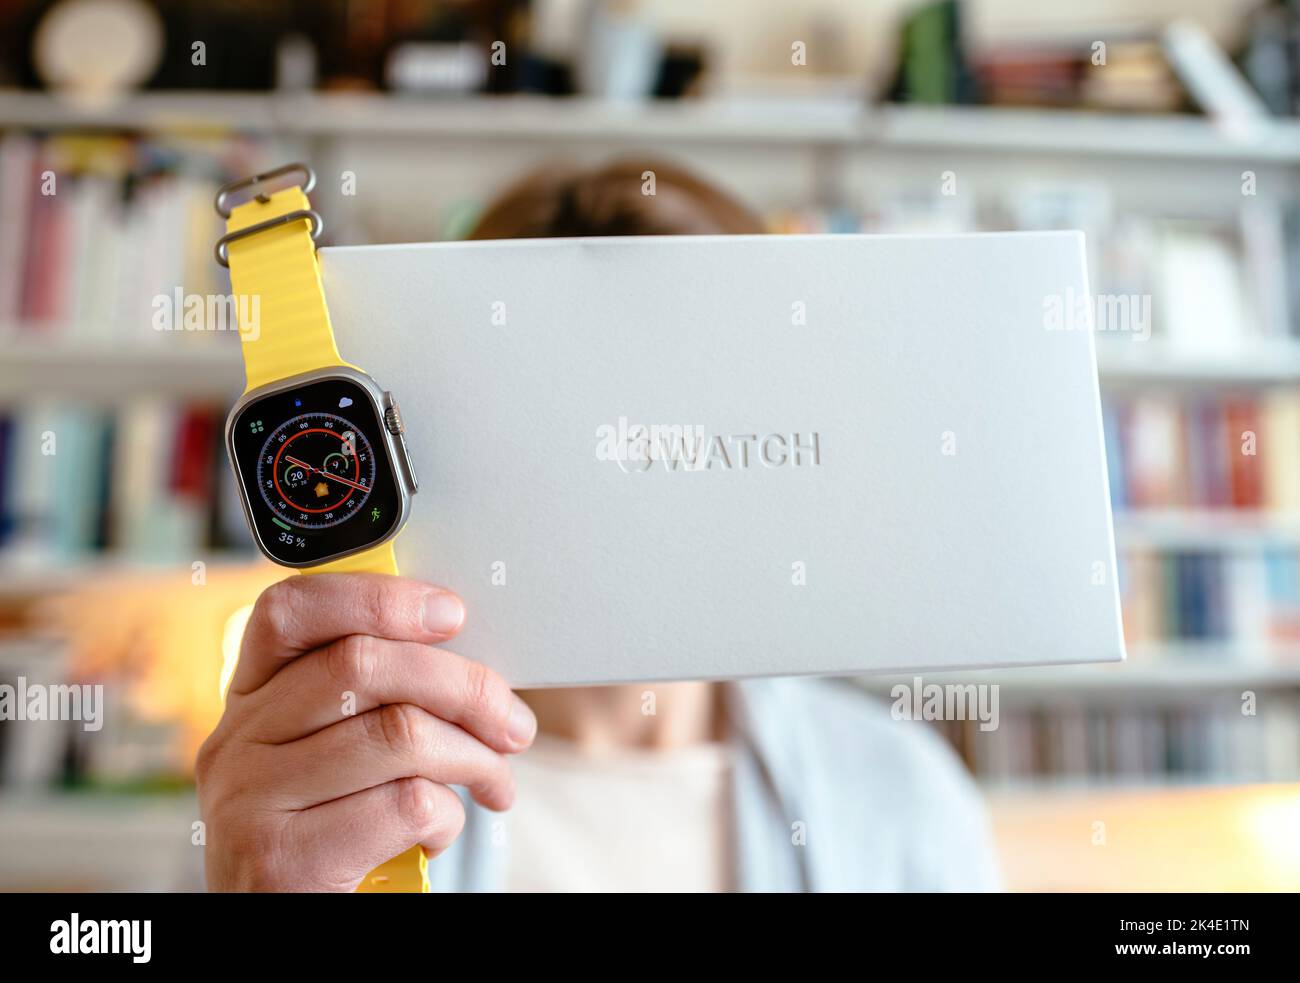 London, United Kingdom - Sept 28, 2022: Woman holding new Apple Computers Apple Watch Ultra next to its innovative packaging - living room bookshelves in background Stock Photo